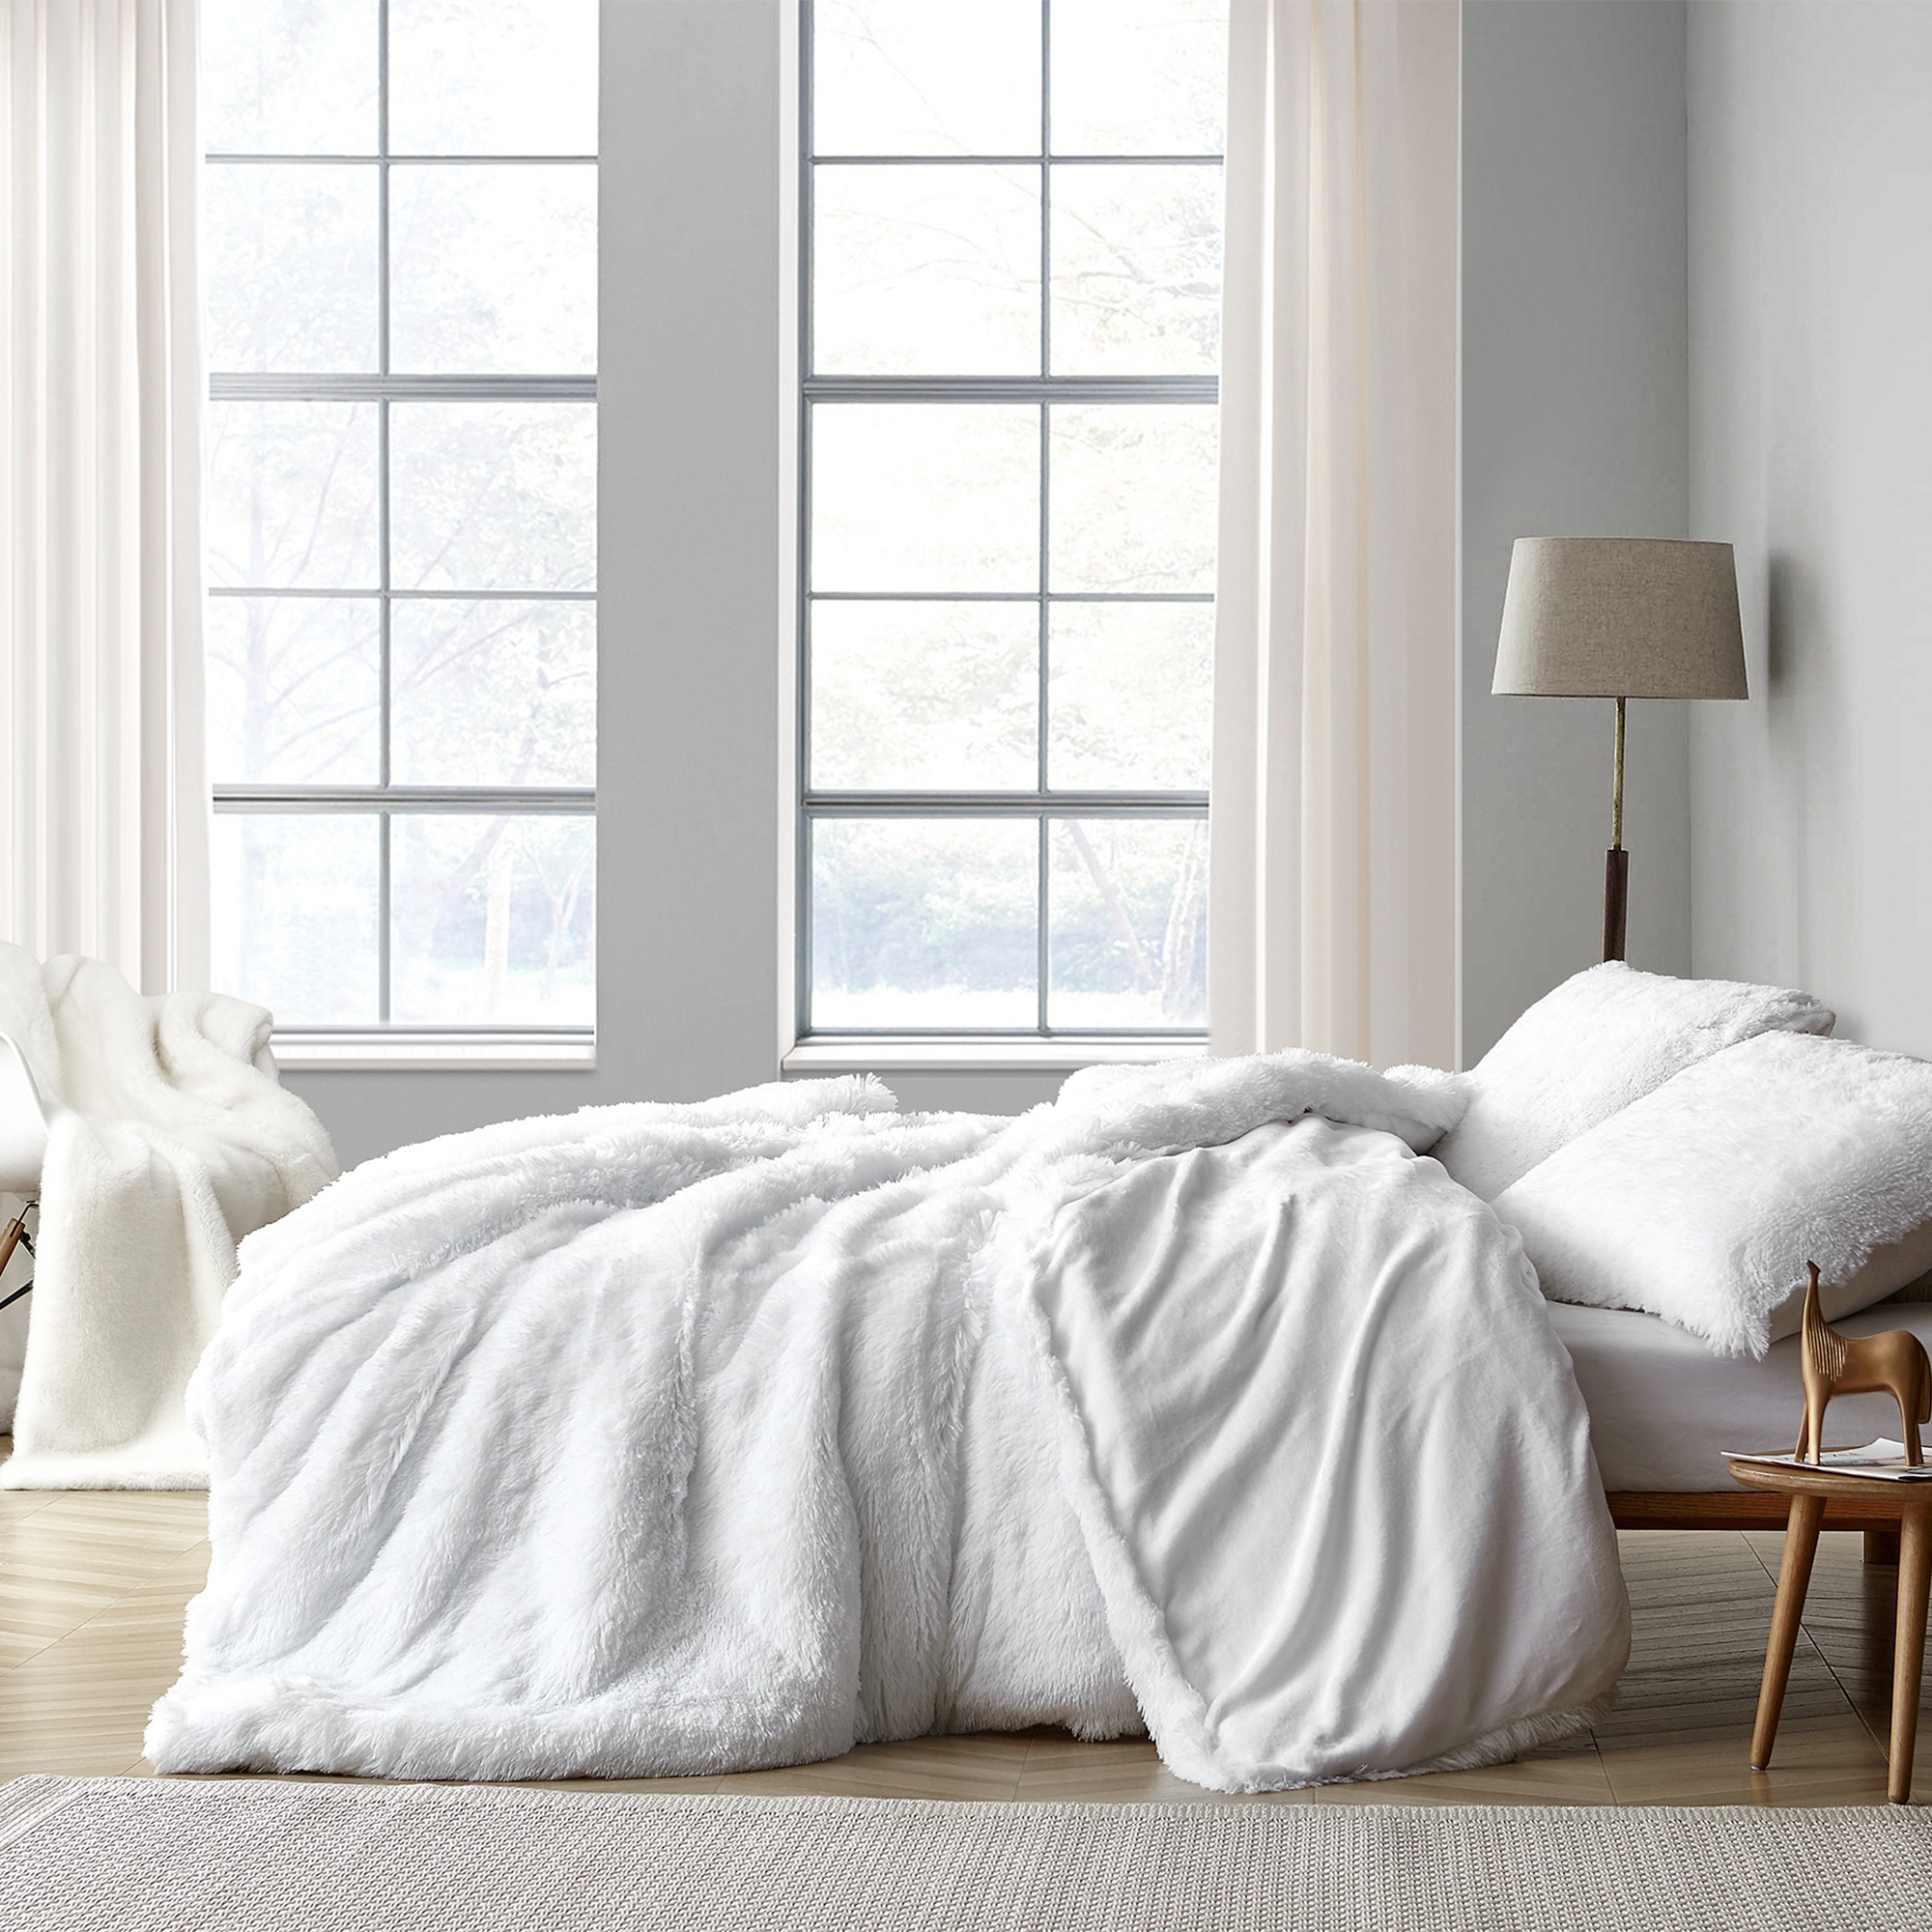 Coma Inducer Duvet Cover - Are You Kidding? - White